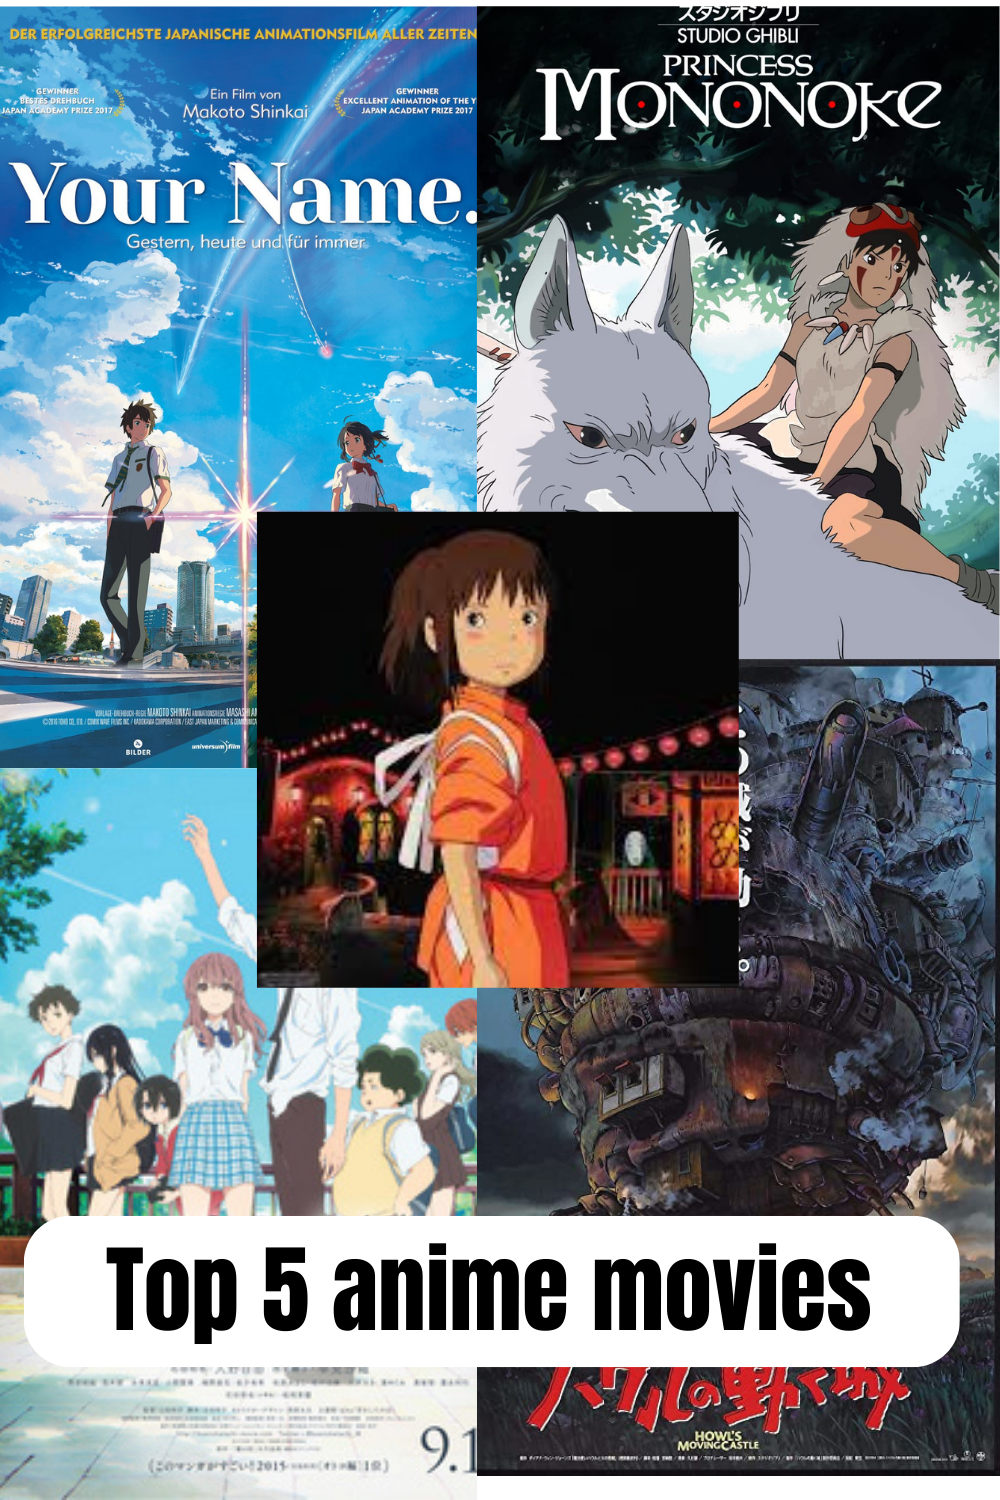 5 upcoming Japanese anime films we are excited about